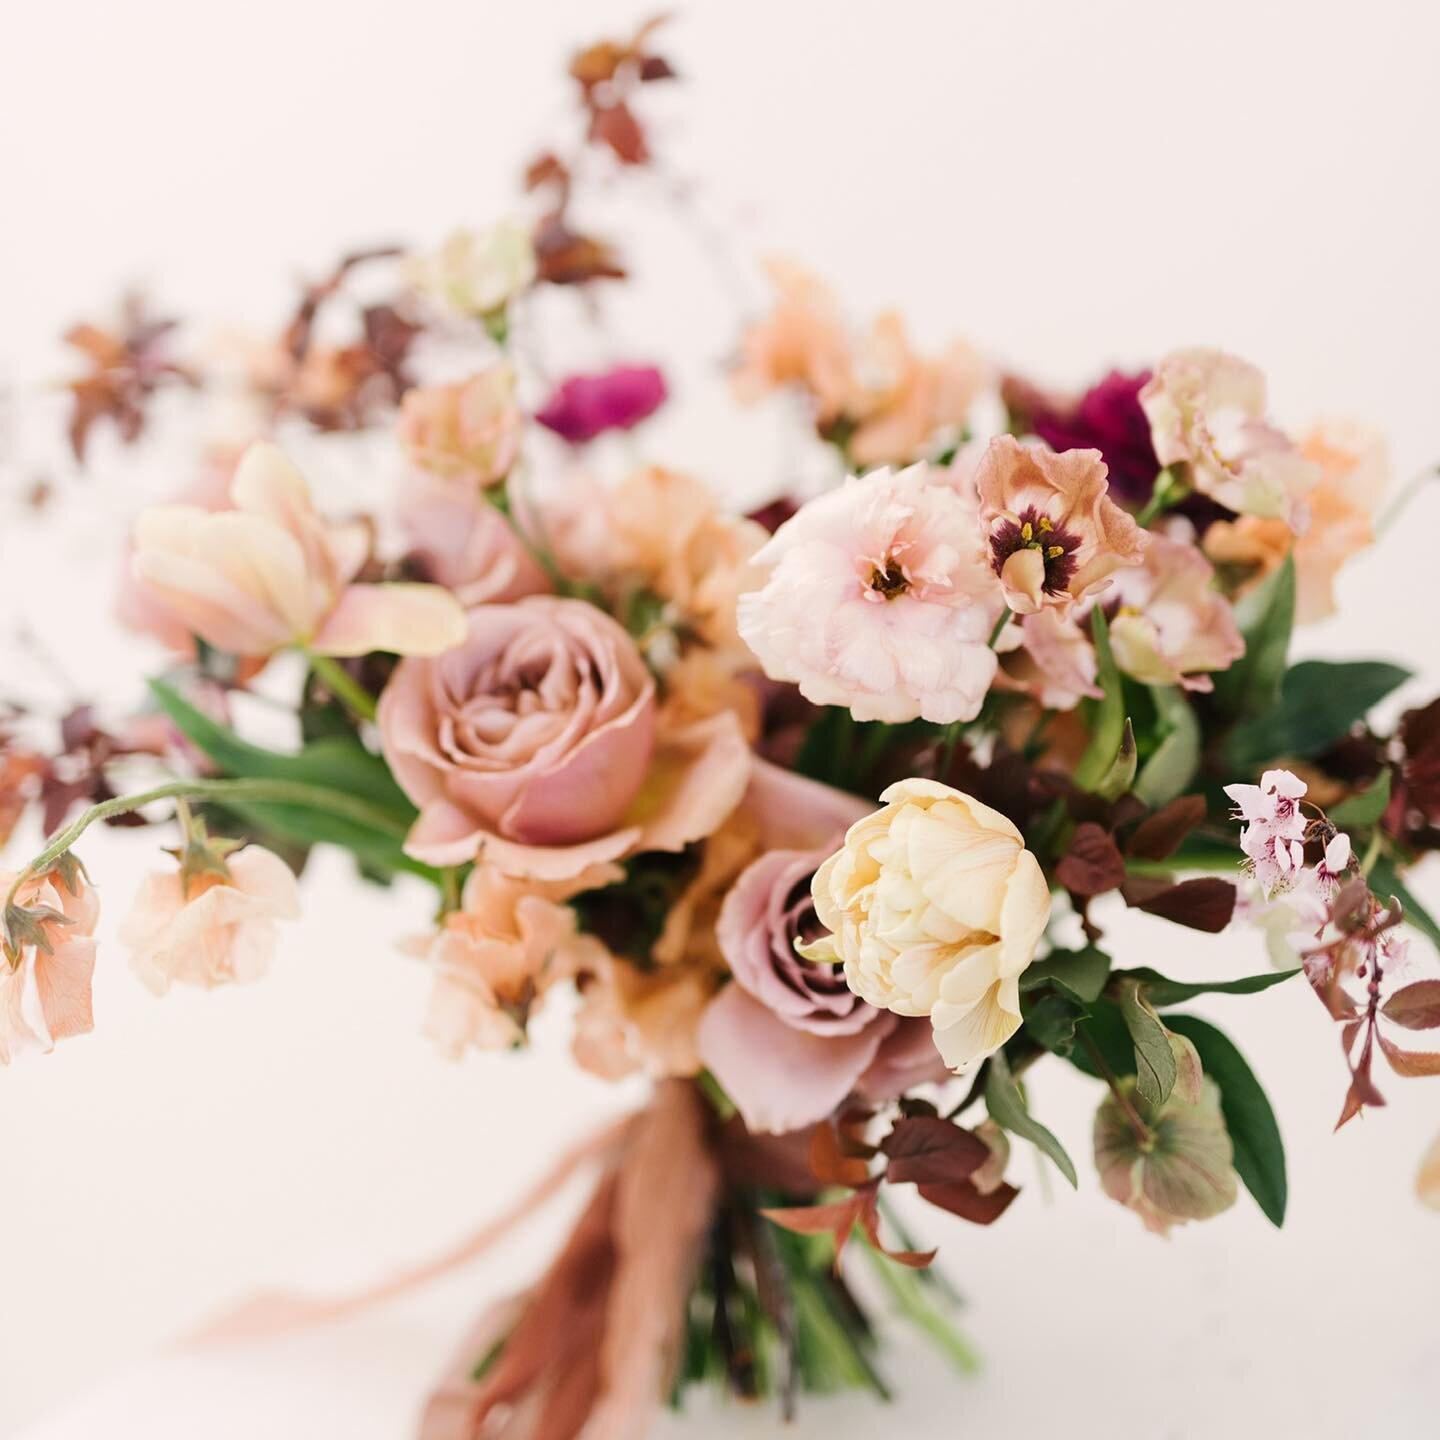 Pretty blooms to help with those Sunday scaries. 

@yvonnegollphotography 
#sundayscaries 
#flowersheal #floraldesign #weddingbouquet #flowersofinstagram #cappuccinoroses